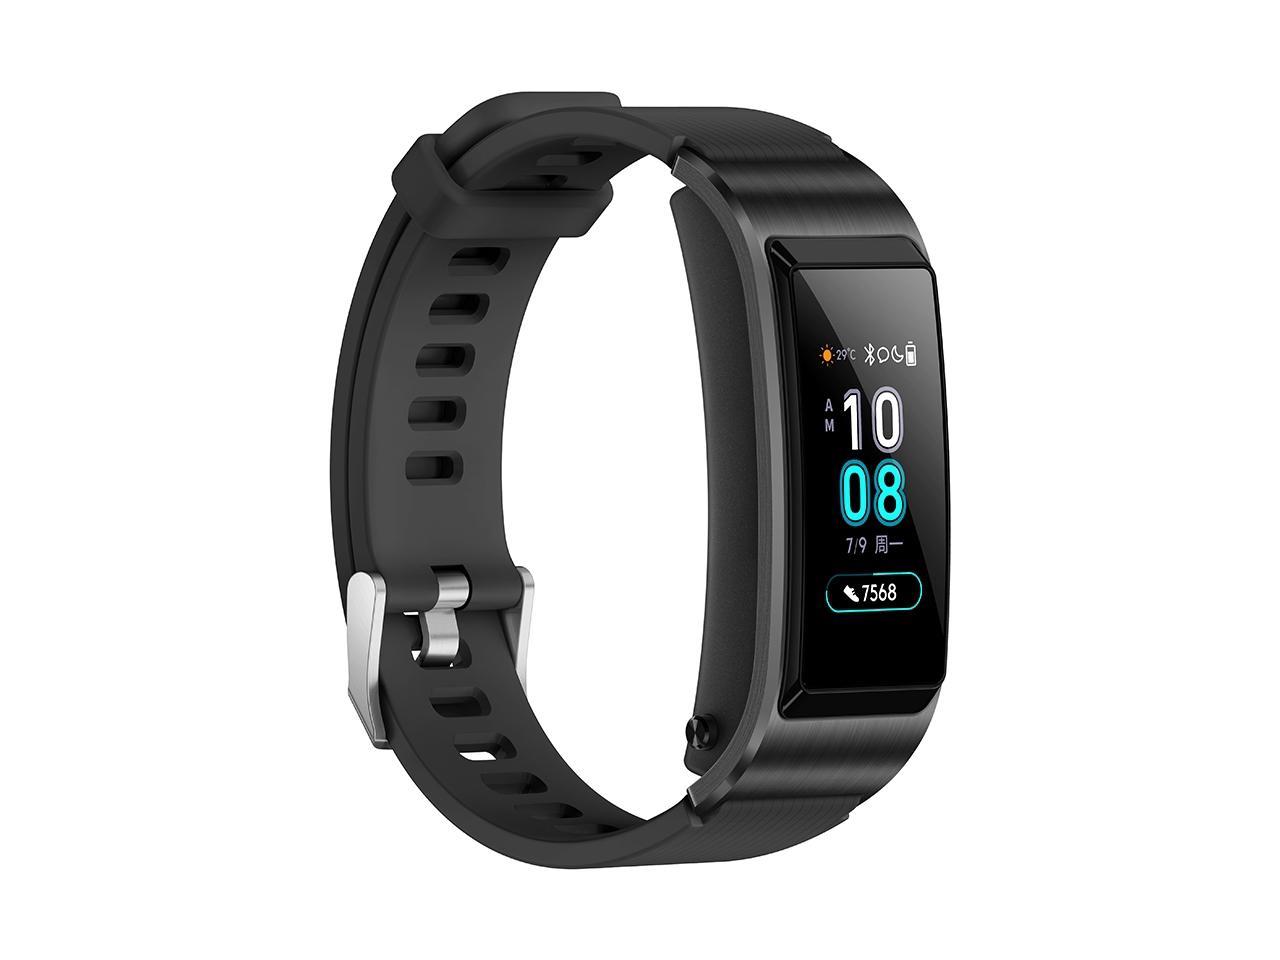 Huawei TalkBand B5 Bluetooth 4.2 Headset Fitness Tracking Sports Smart Bracelet for Android / iOS 1.13 inch Touch AMOLED 2.5D Screen